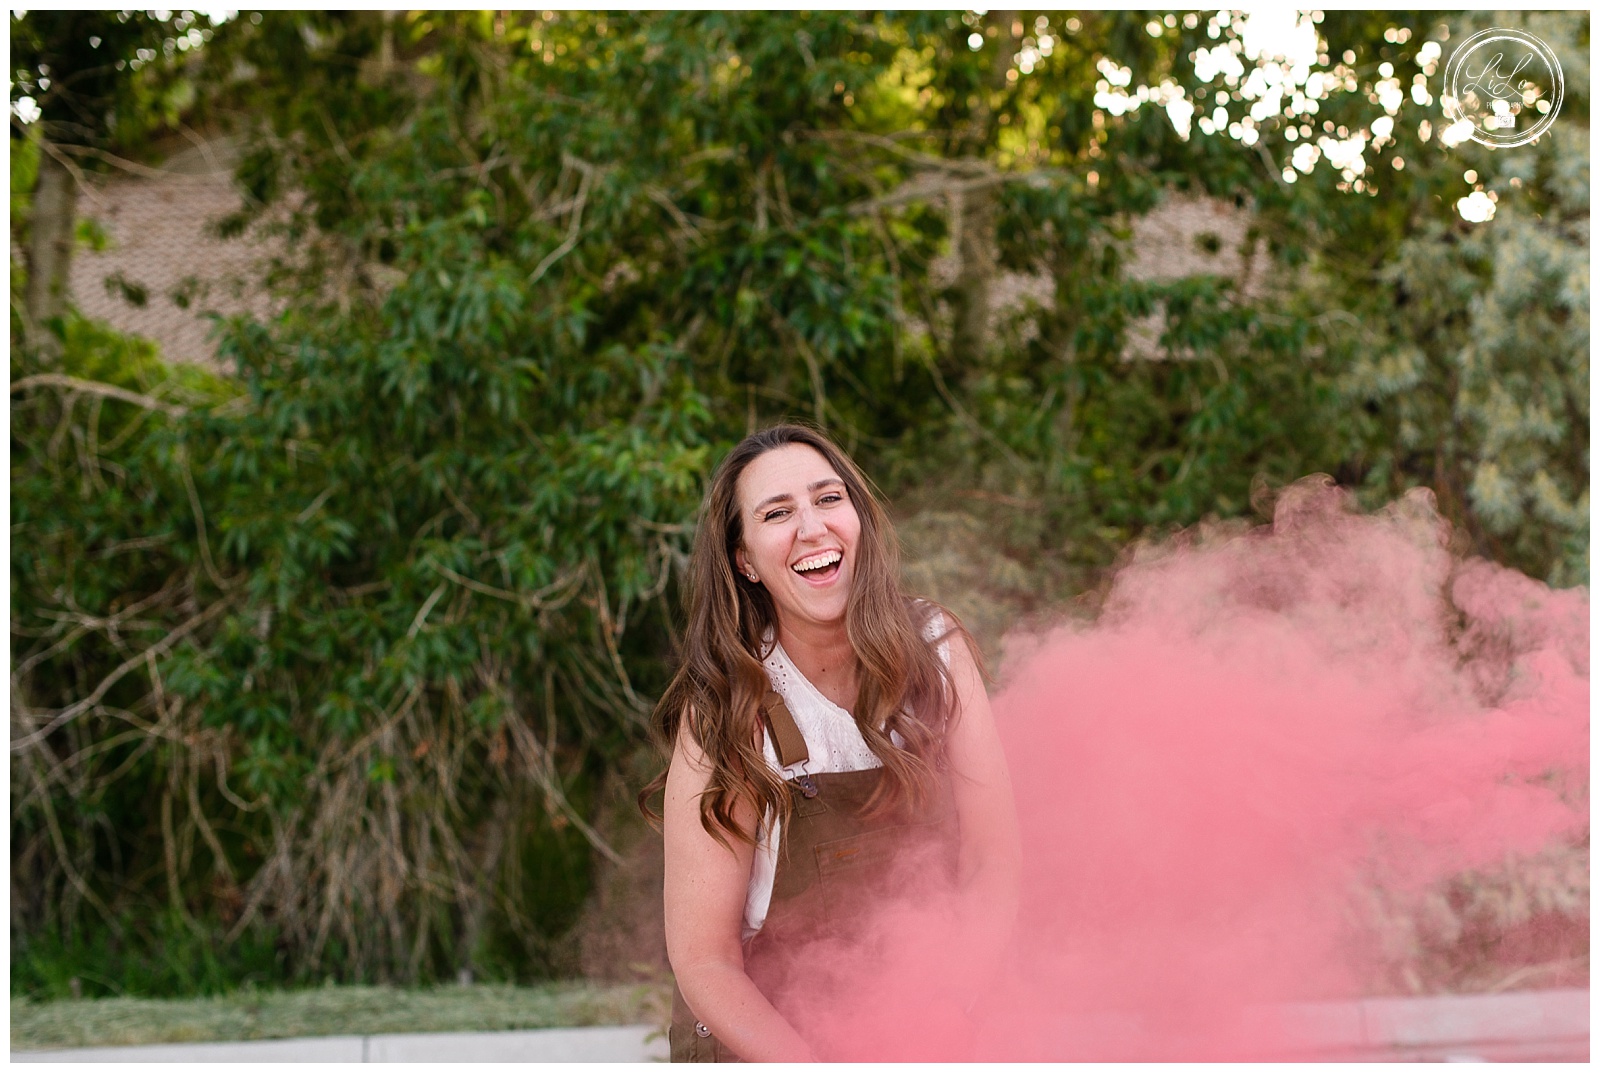 Denver senior photographer captures outdoor senior photos with female model laughing as a pink smoke bomb goes off in front of her